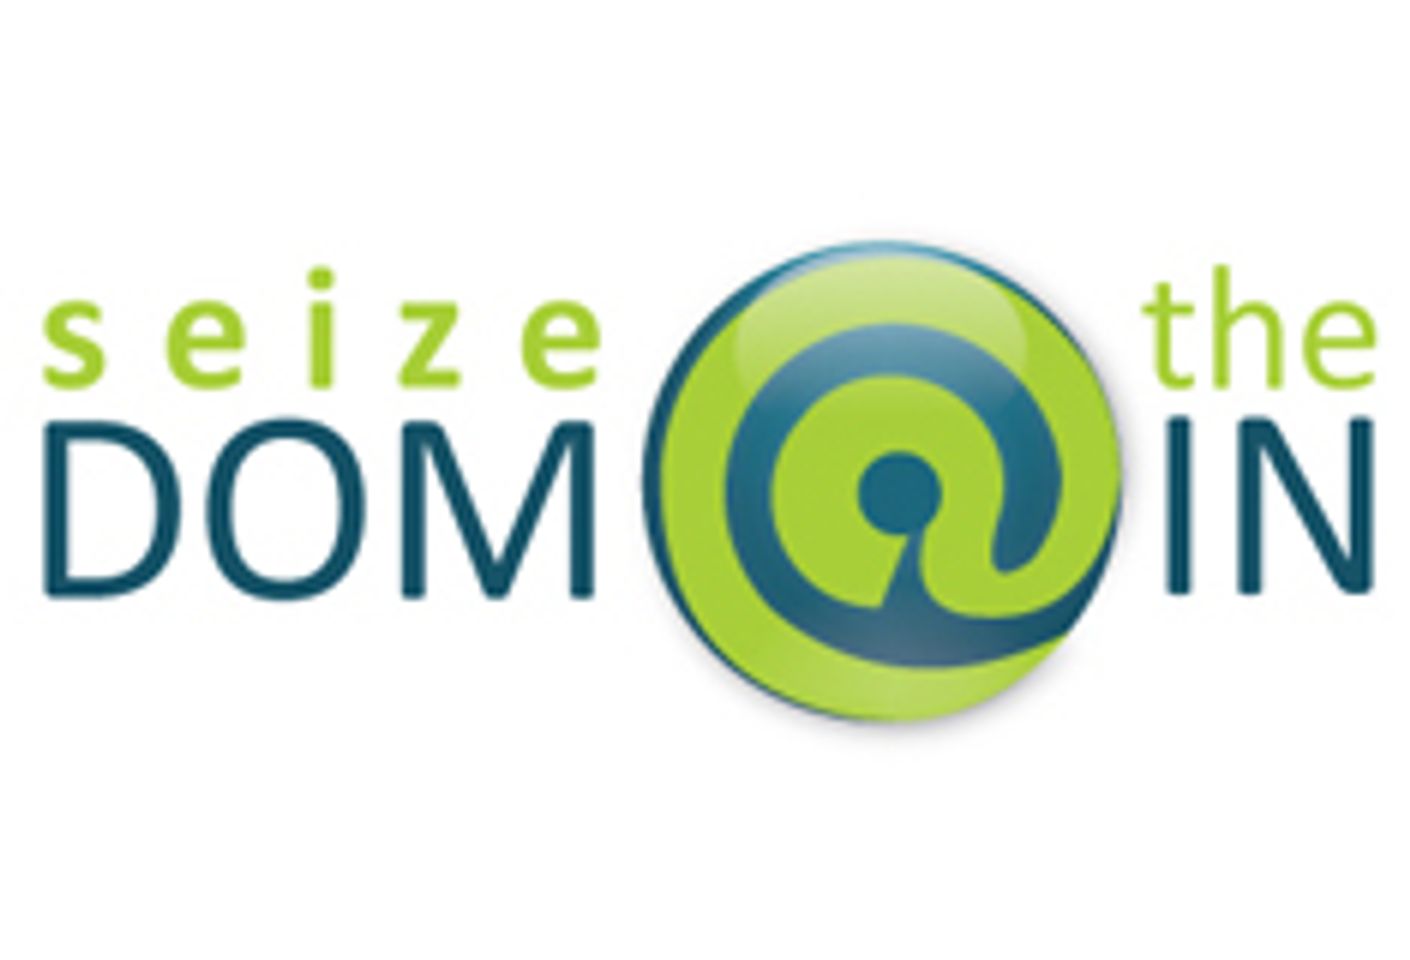 SeizetheDomain Will Present Online Auction at Cybernet Expo